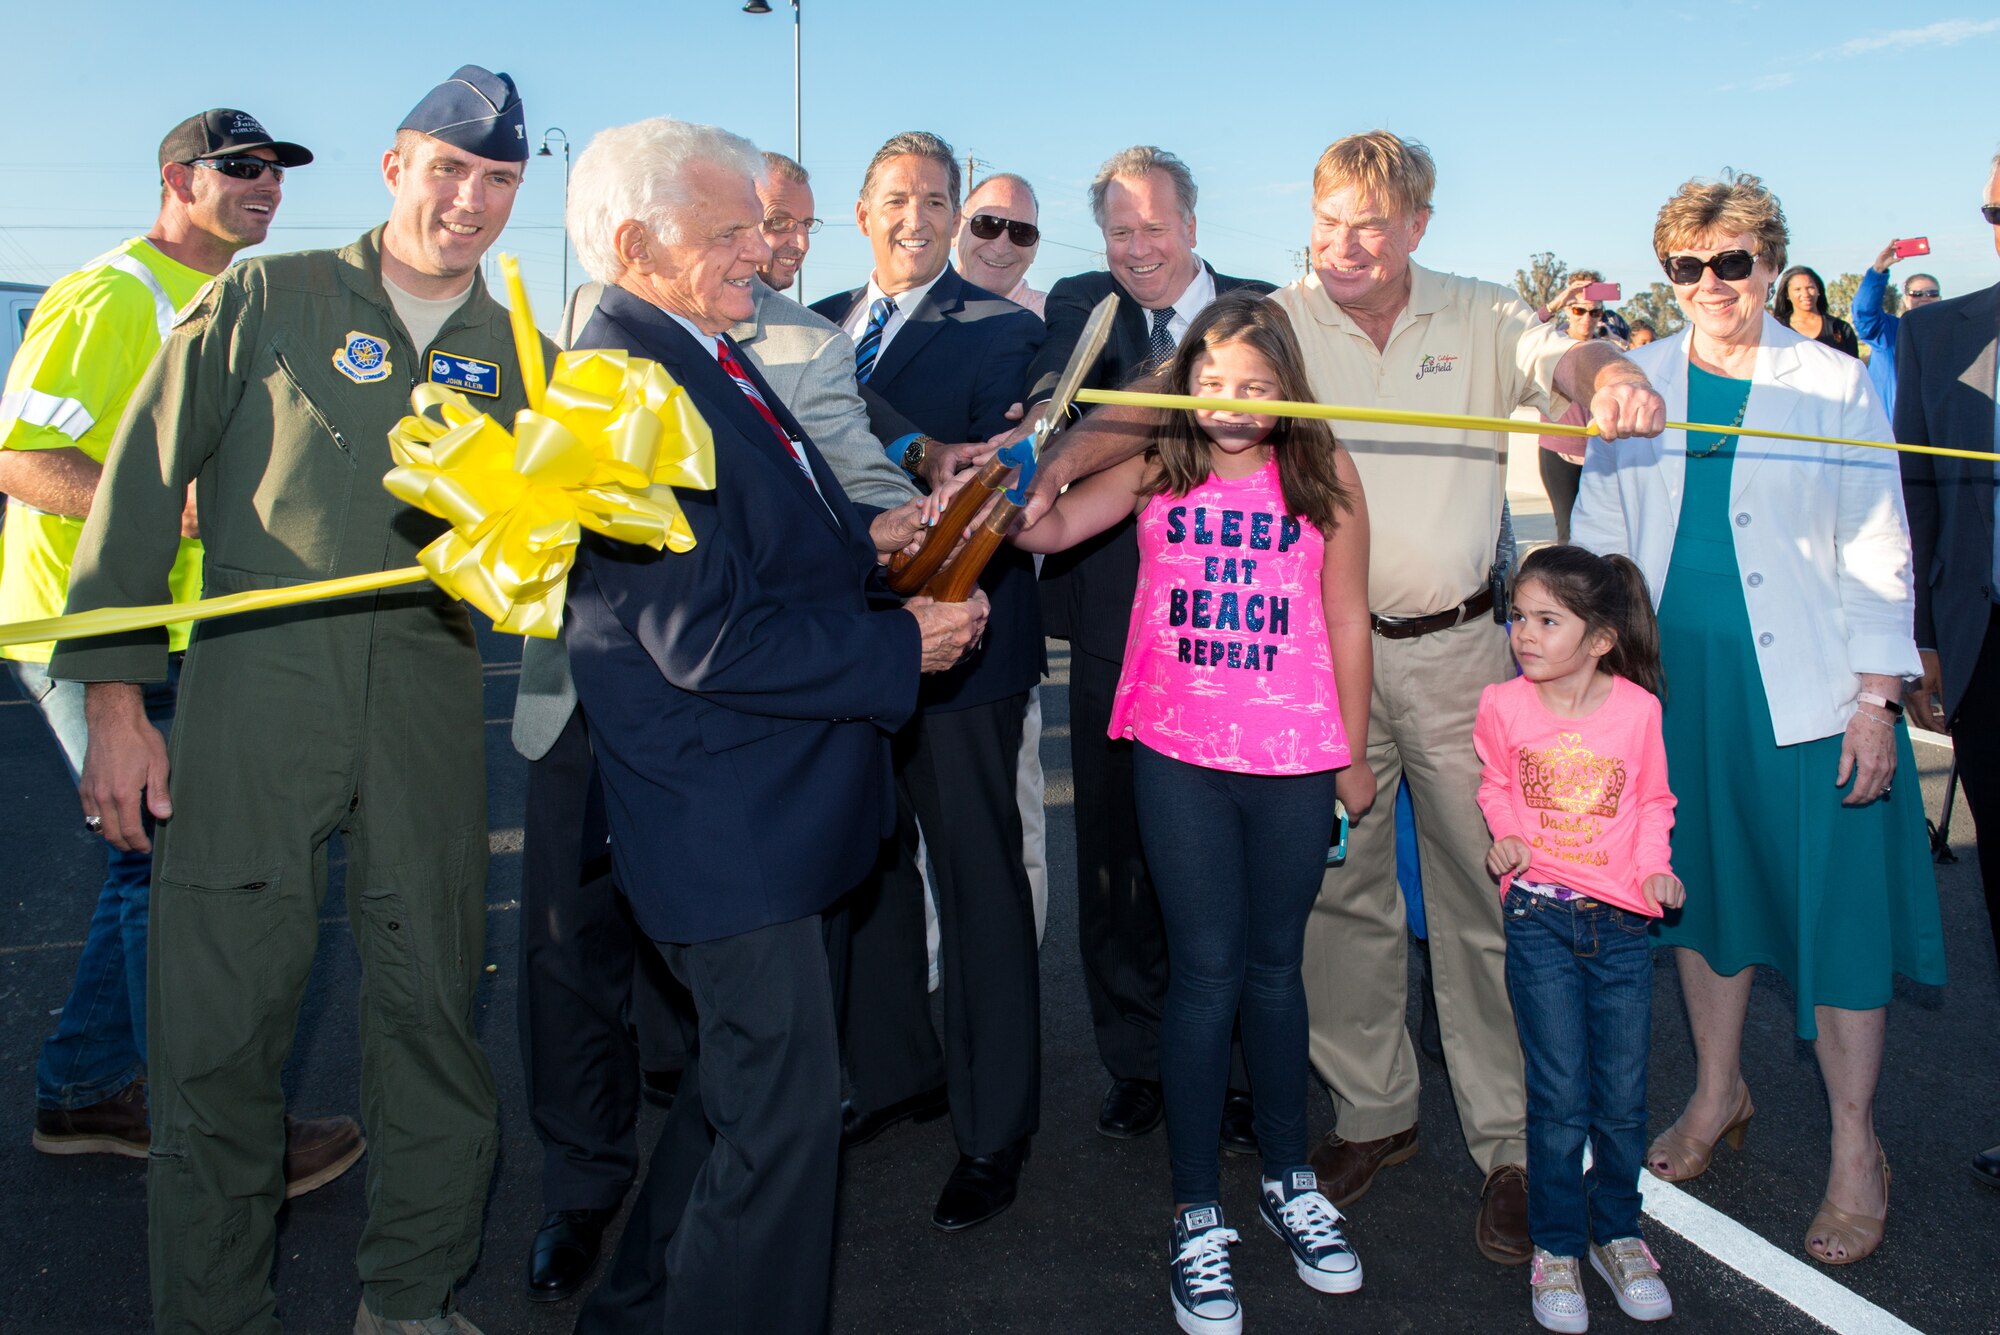 Mayor Harry Price, City of Fairfield, Calif., U.S. Air Force Col. John Klein, 60th Air Mobility Wing commander, at Travis Air Force Base, Calif., and other city officials cut the ribbon officially opening the Peabody Road overpass during the reopening ceremony in Fairfield, Calif., Aug. 4, 2016. The road was closed for 14-months and finished ten days ahead of schedule. Peabody Road is a major thoroughfare that connects the cities of Vacaville and Fairfield, more than 20,000 vehicles per day use the road and it is also a major artery into Travis Air Force Base for more than 14,000 employees. The construction of the Peabody Road overpass is part of the new Fairfield-Vacaville train station project along the Capitol Corridor. (U.S. Air Force photo by Louis Briscese) 